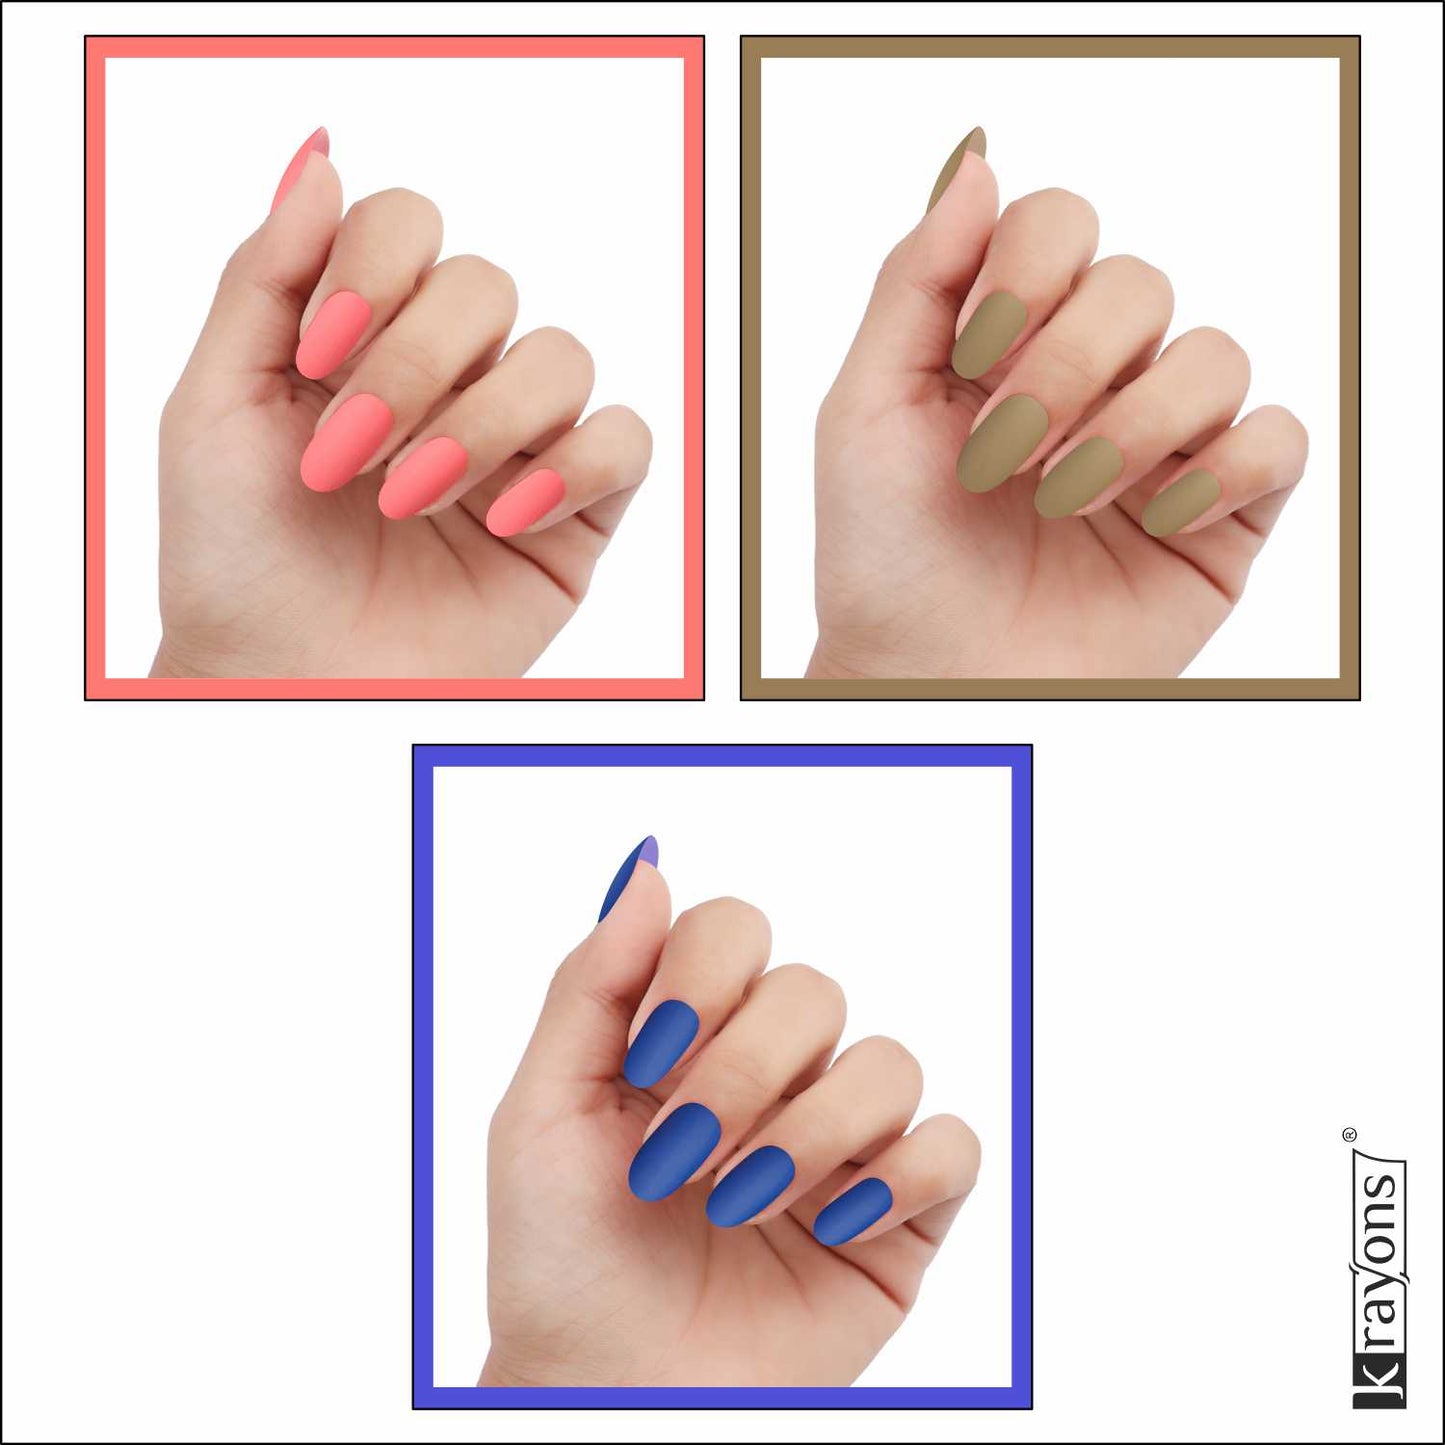 Krayons Cute Super Matte Finish Nail Enamel, Quick Dry, LongLasting, Blossom Peach, Nude Beige, Blue Ink, 6ml Each (Pack of 3)